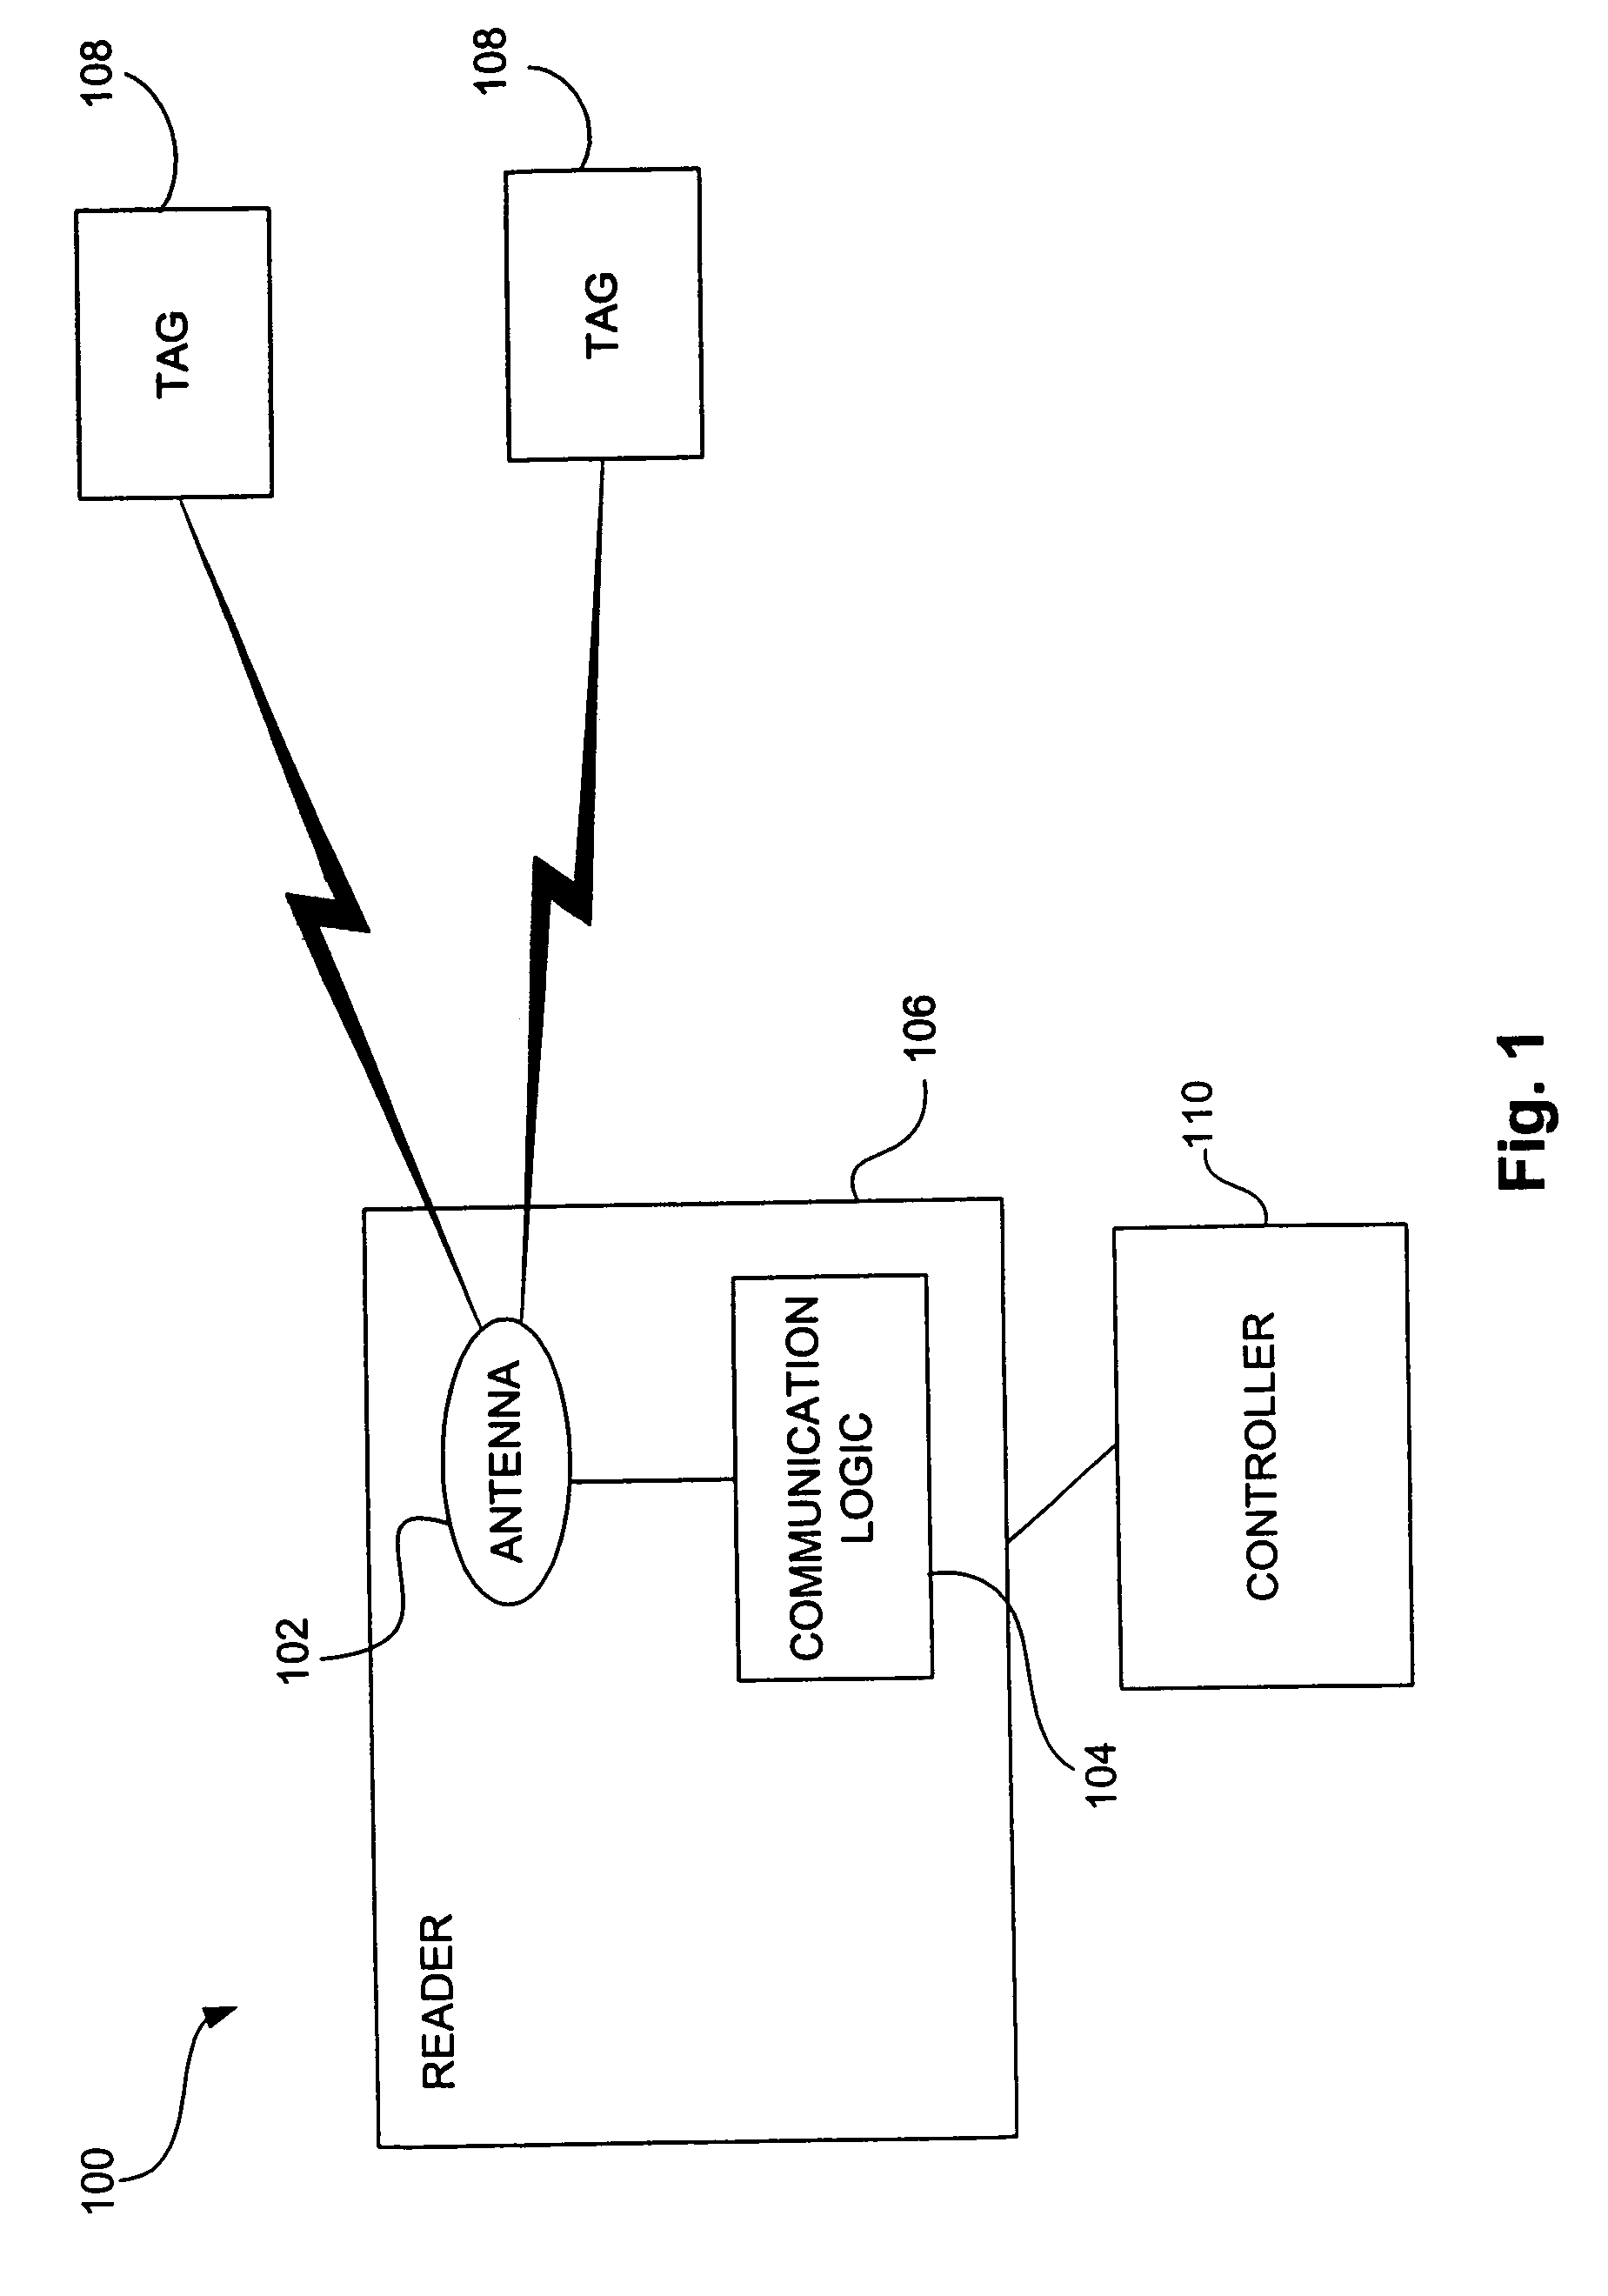 System and method for concurrently addressing multiple radio frequency identification tags from a single reader